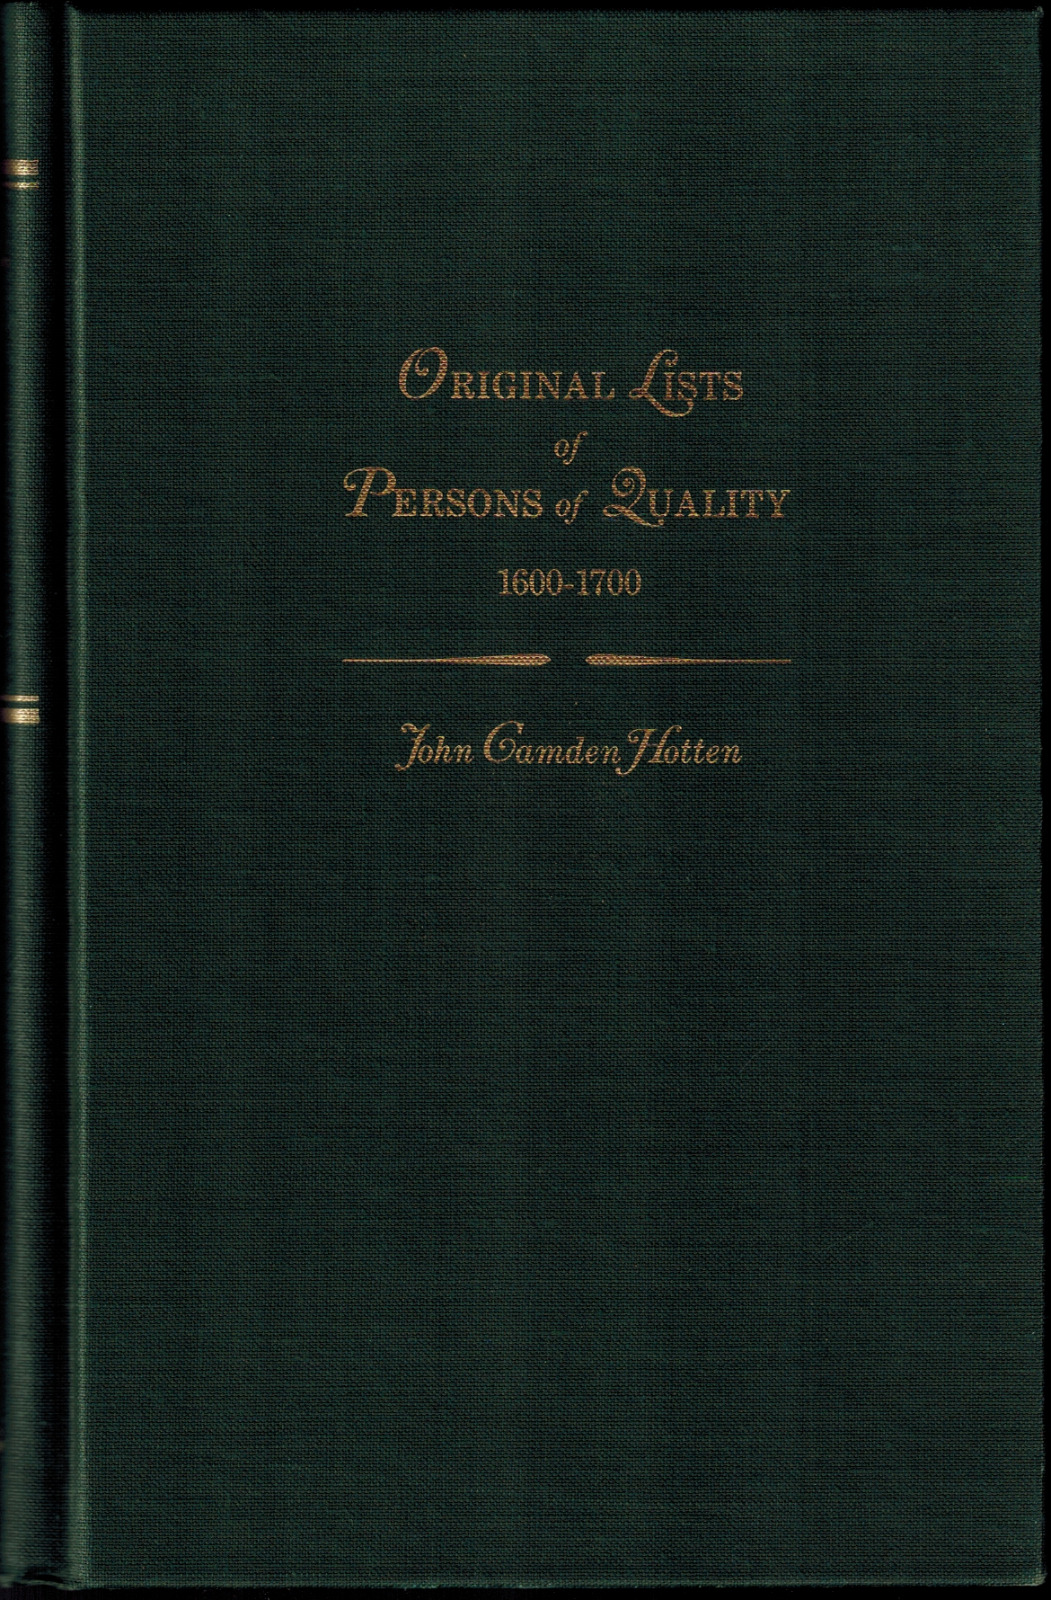 1983 Original Lists Of Persons Of Quality 1600-1700, Colonial America Genealogy